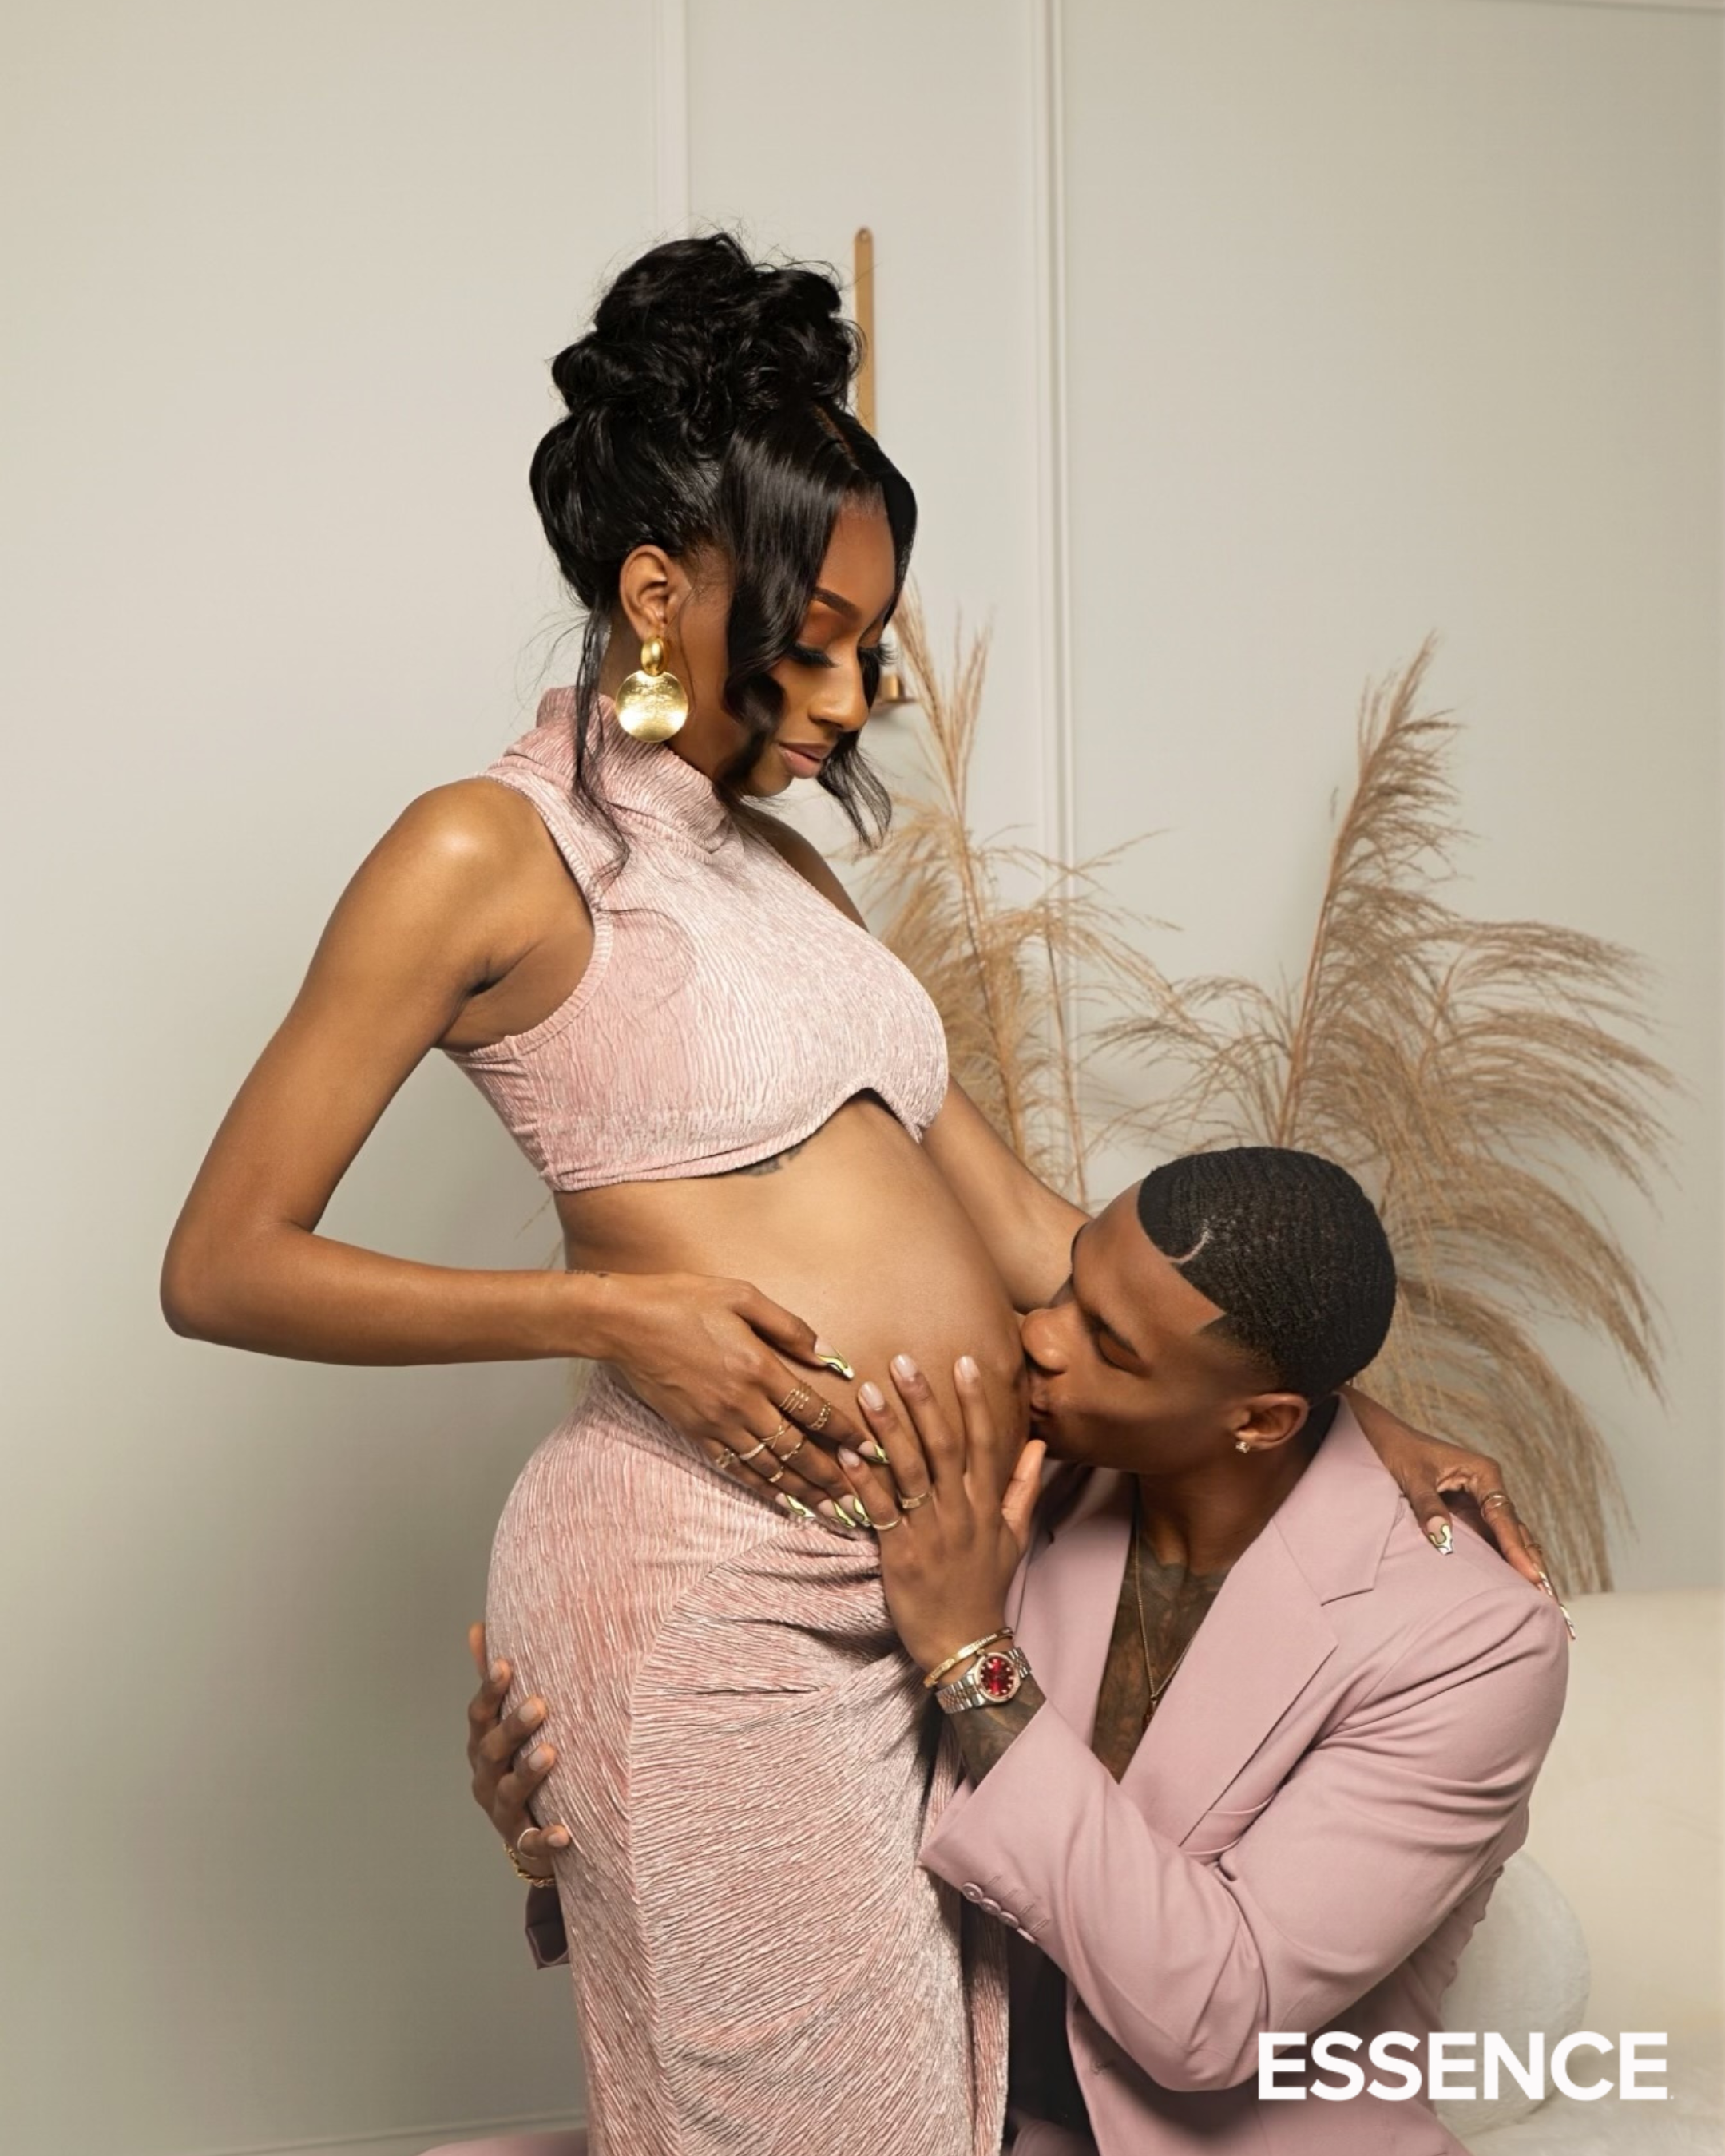 Exclusive: LaLa Milan Is Pregnant!